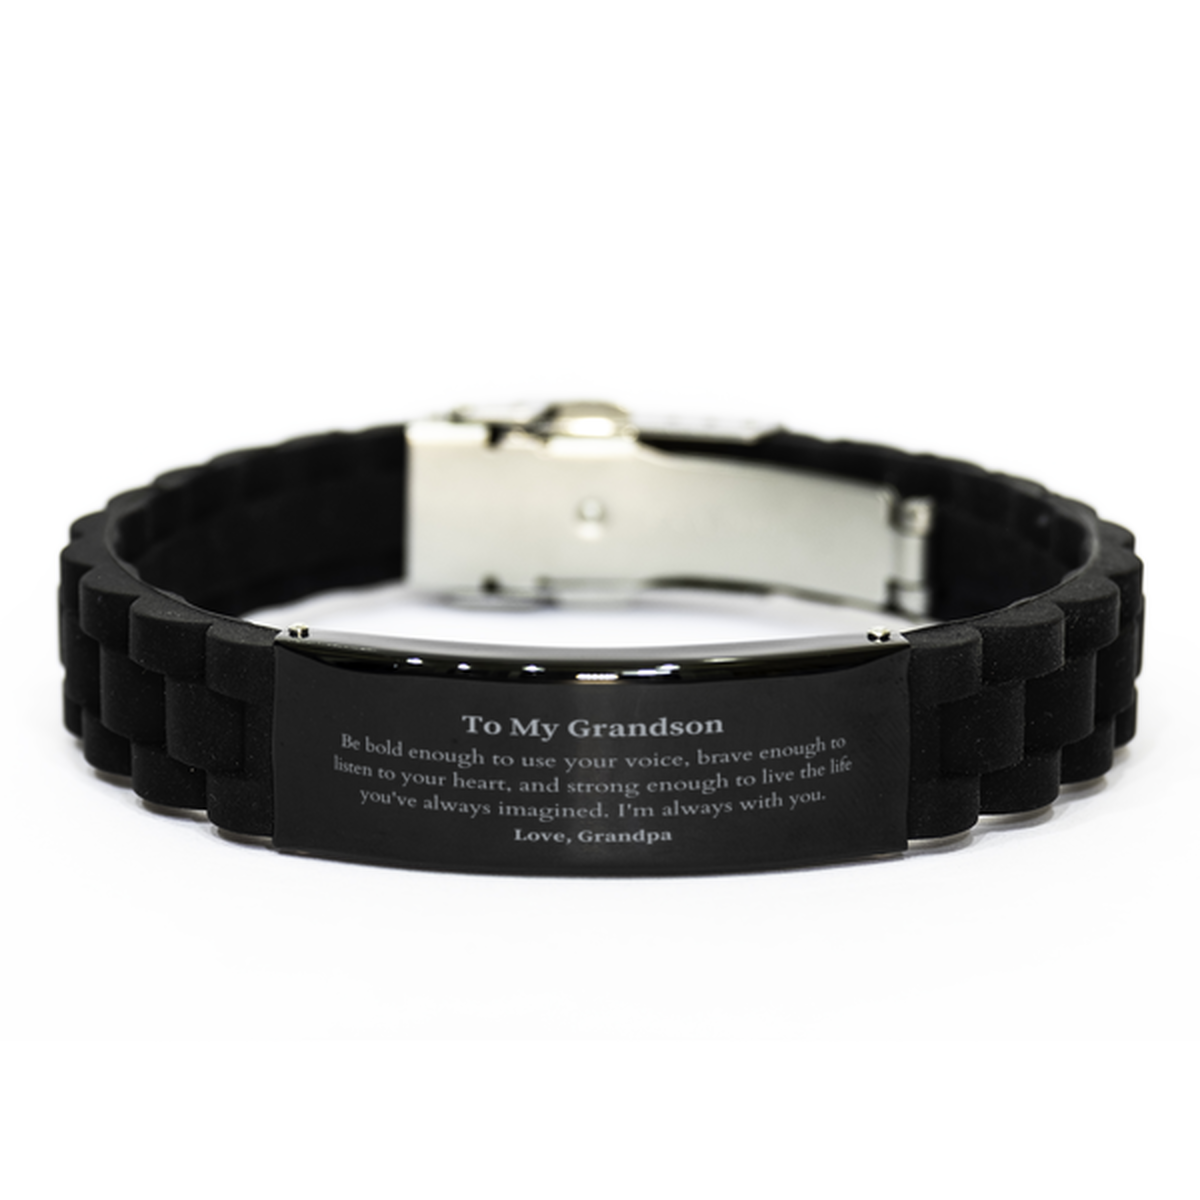 Keepsake Grandson Black Glidelock Clasp Bracelet Gift Idea Graduation Christmas Birthday Grandson from Grandpa, Grandson Be bold enough to use your voice, brave enough to listen to your heart. Love, Grandpa